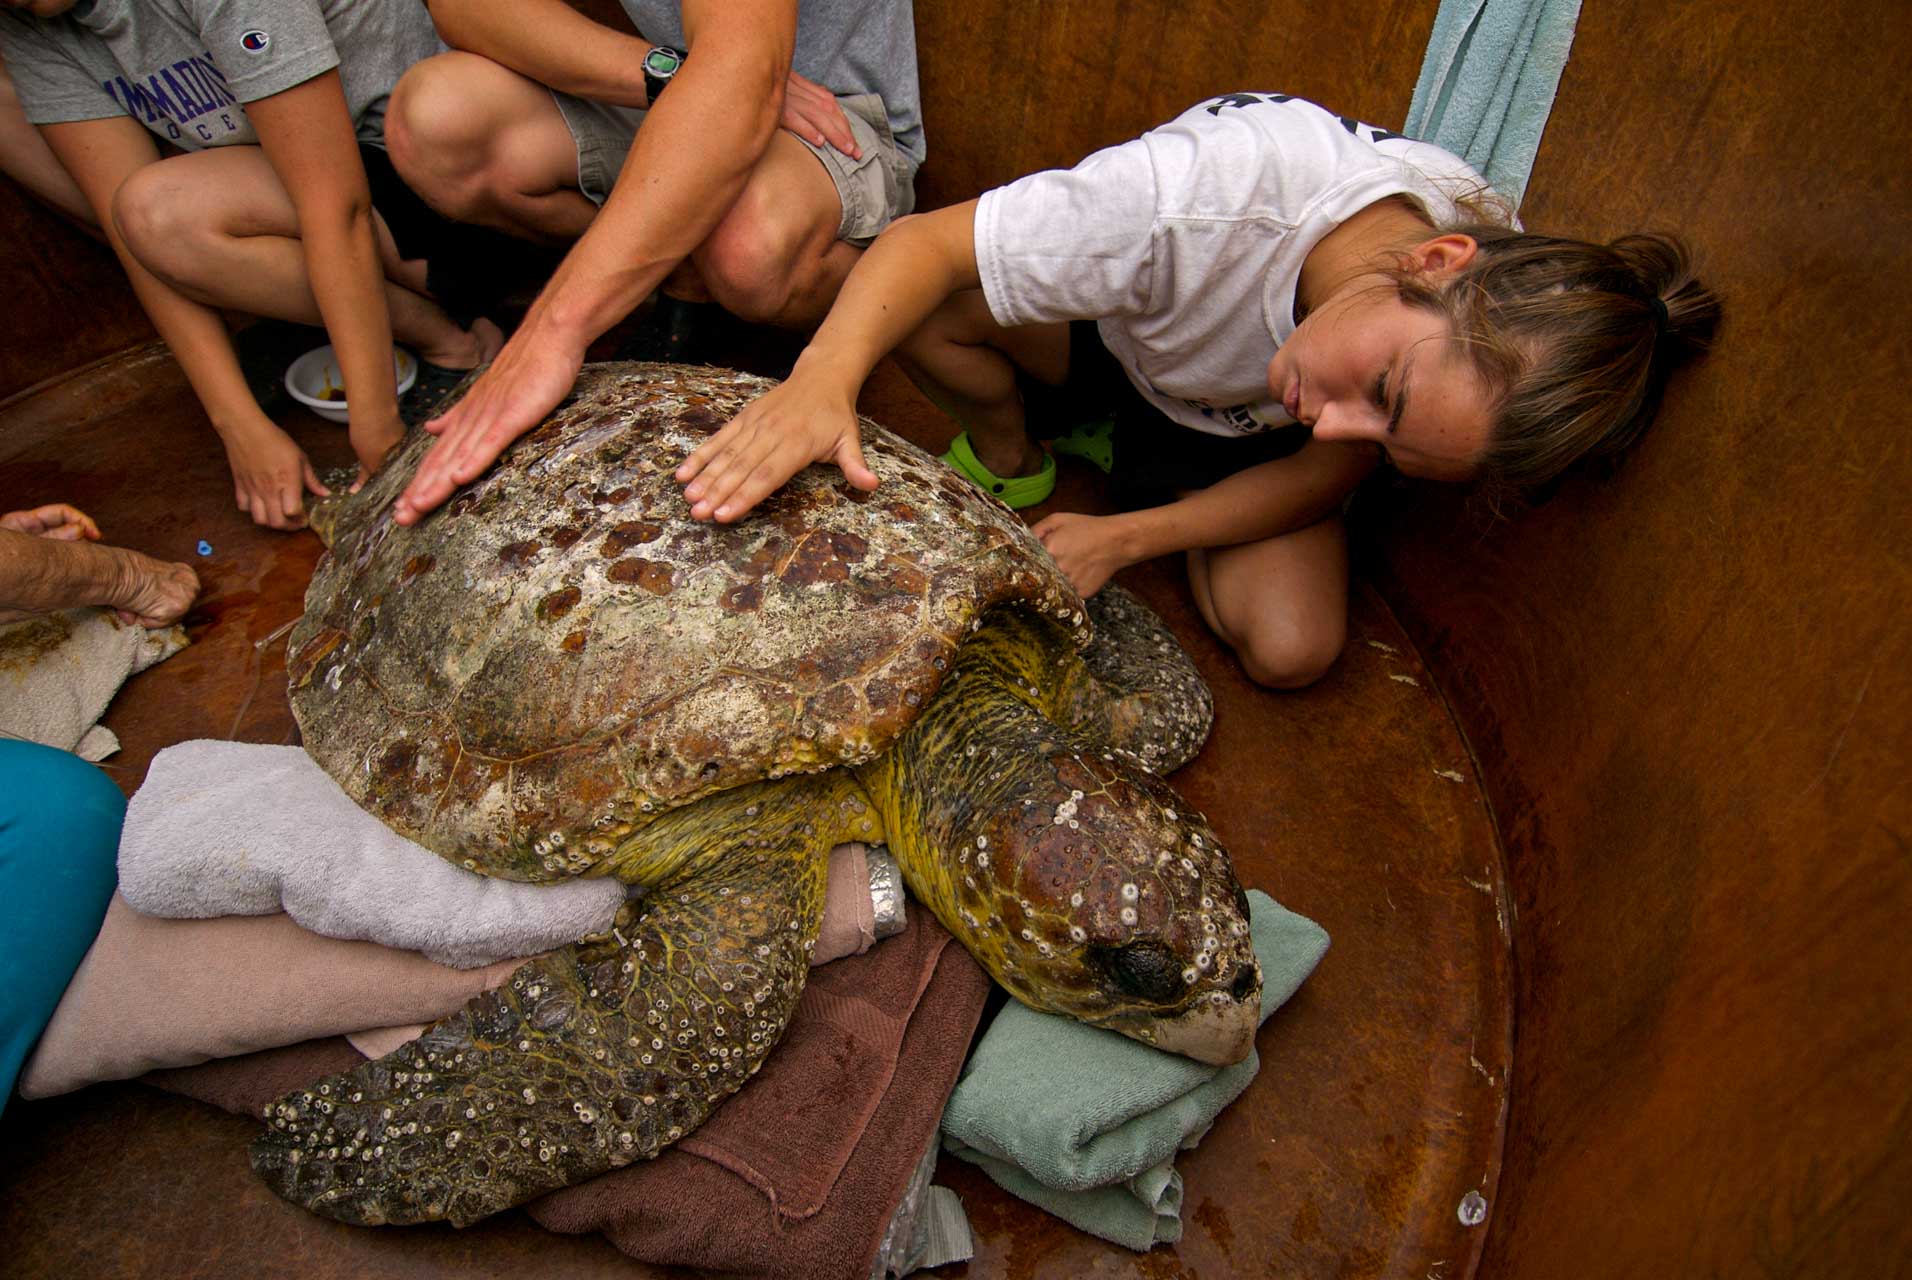 Lisa Rodriquez, a volunteer staff member from the Karen Beasley Rehabilitation Center comforts a loggerhead sea turtle while assessing health. The large female washed up on a beach north of Topsail. Caretta caretta. Karen Beasley Rehabilitation Center, Topsail Island, North Carolina, USA.